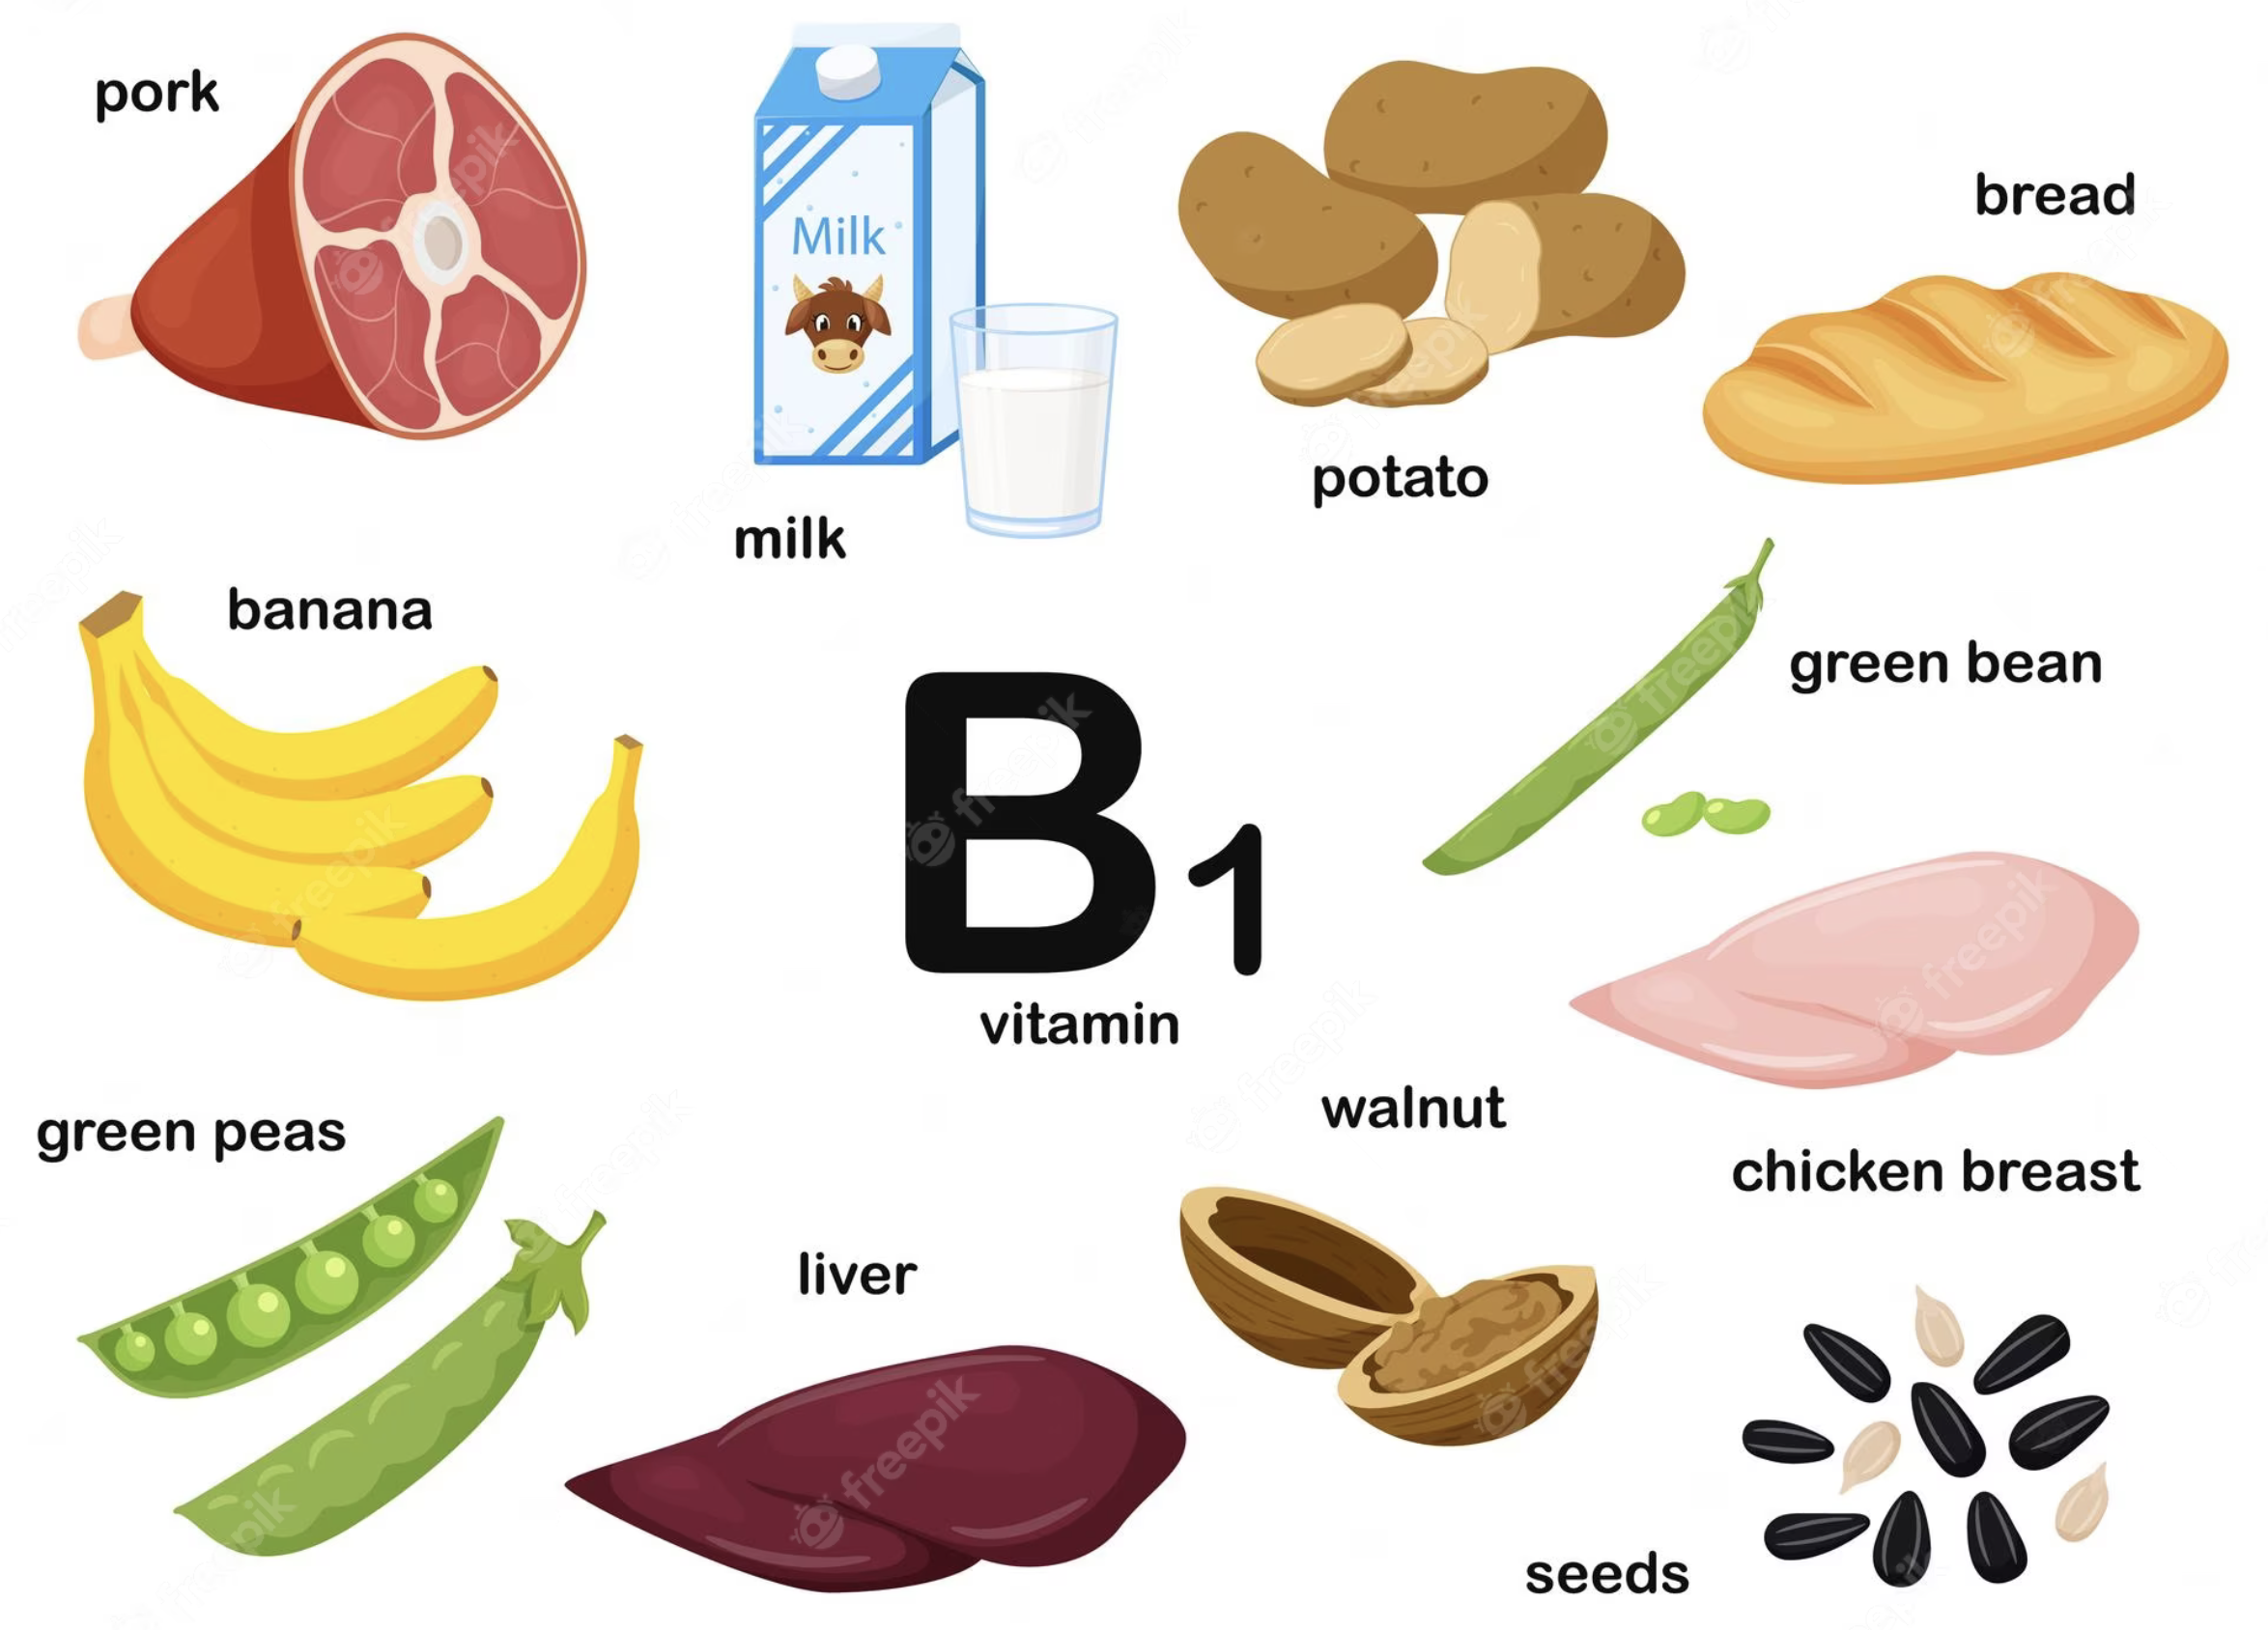 Vitamin B1 may offer antioxidative protection through thiamin’s various effects.